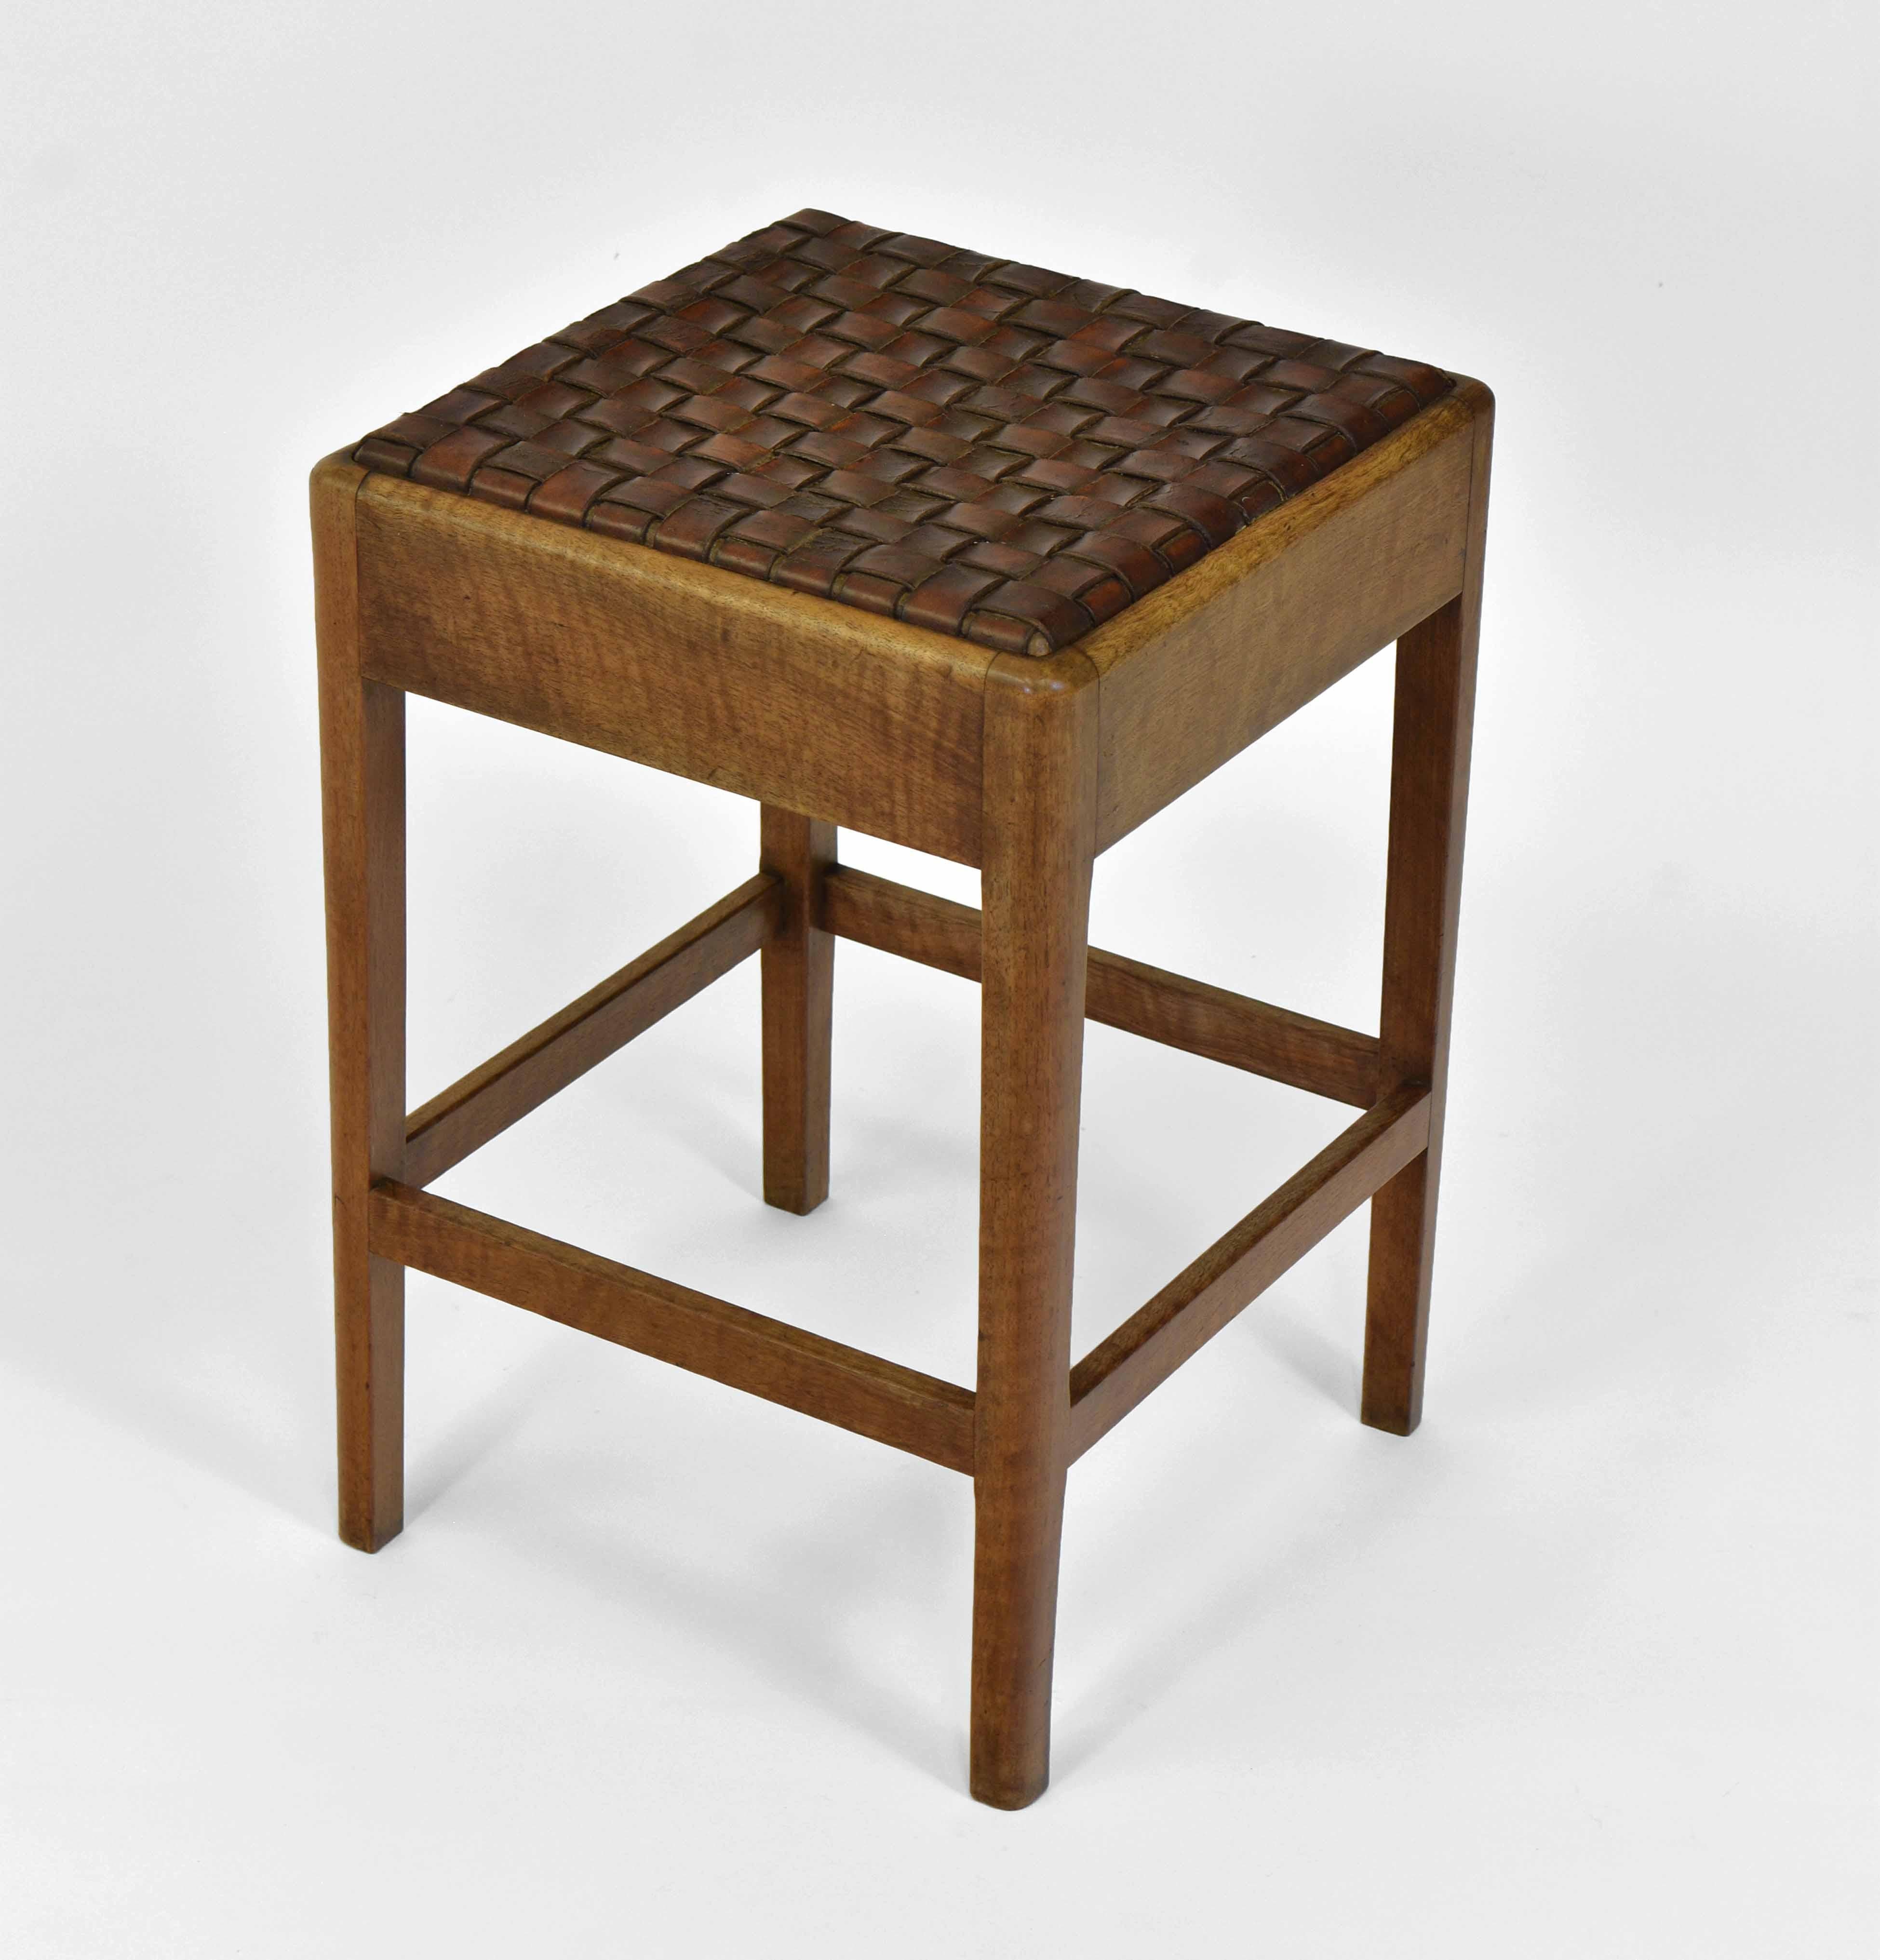 An Arts & Crafts Cotswold School manner walnut and leather lattice strapwork topped stool. Circa 1920. Paper label 